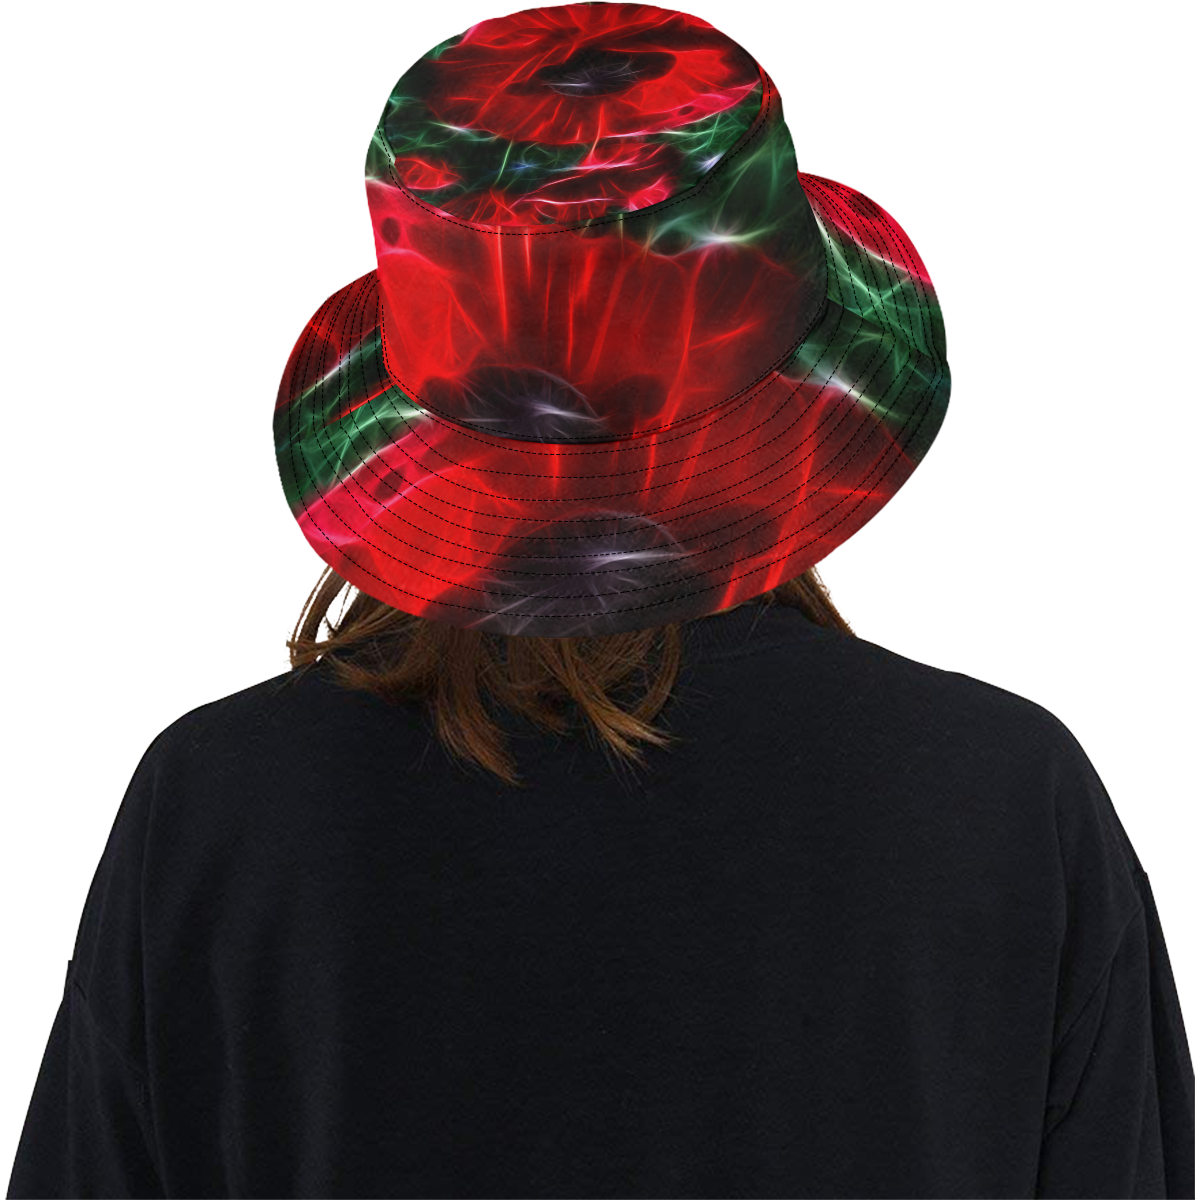 Wonderful Poppies In Summertime All Over Print Bucket Hat